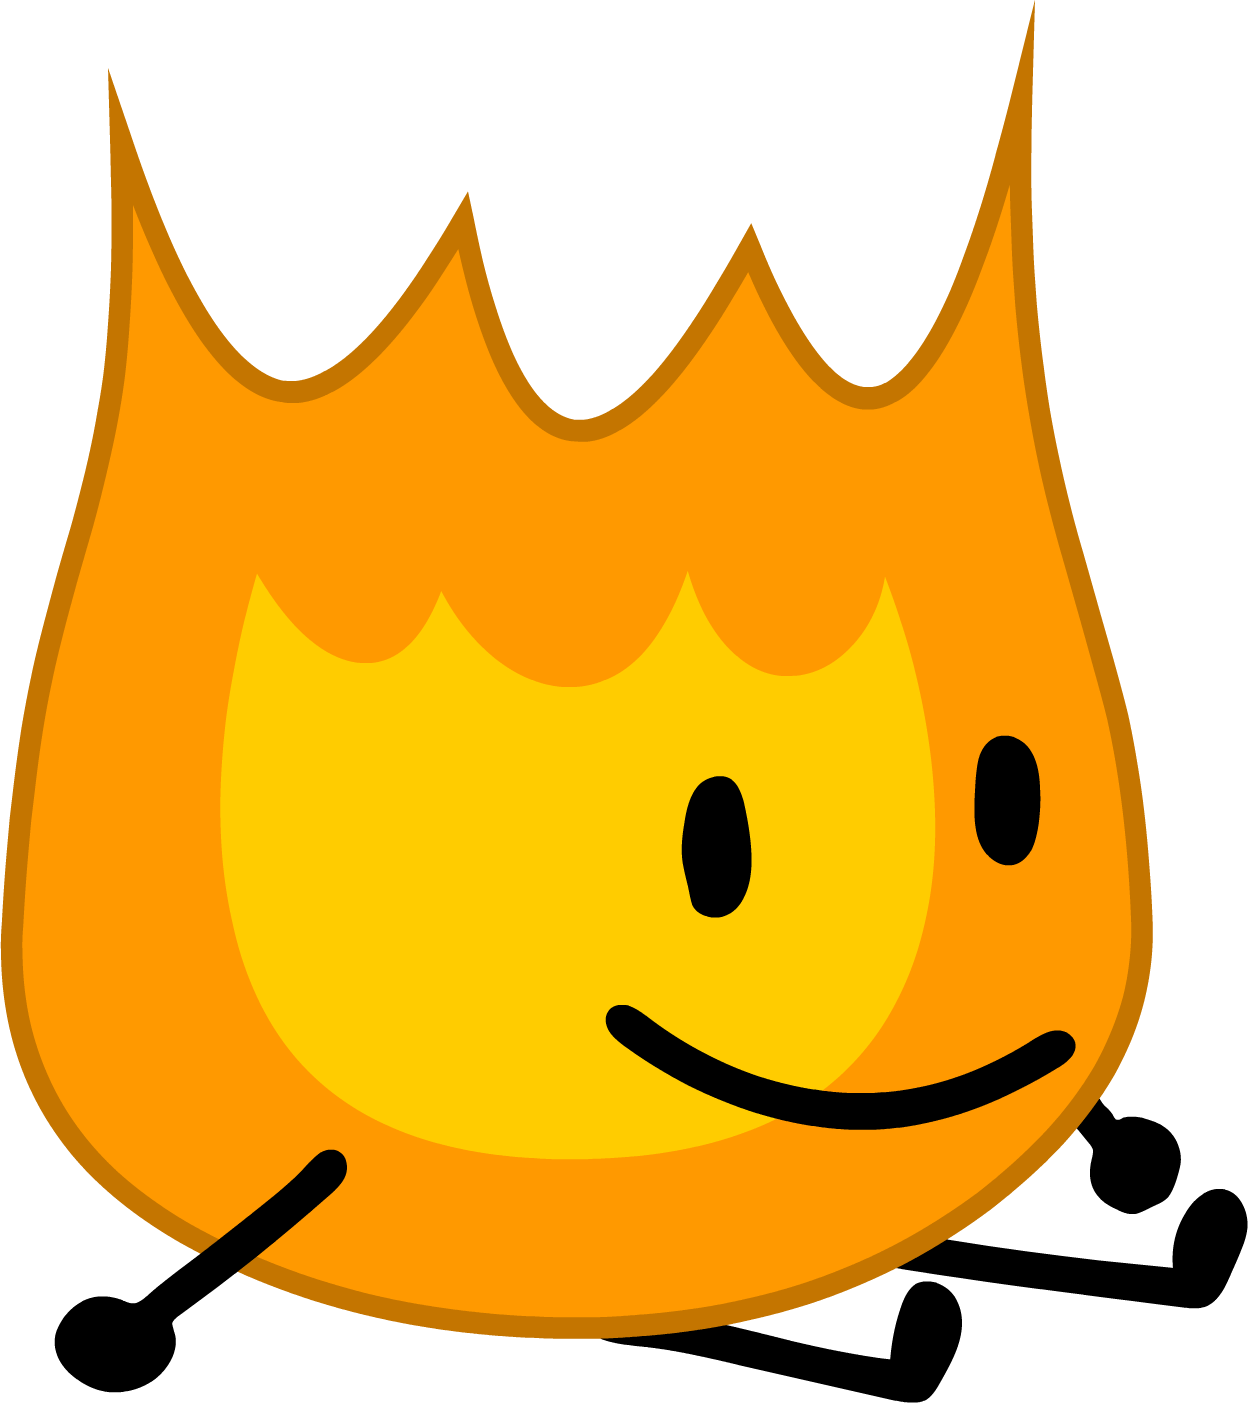 A Cartoon Fire With A Face And Arms